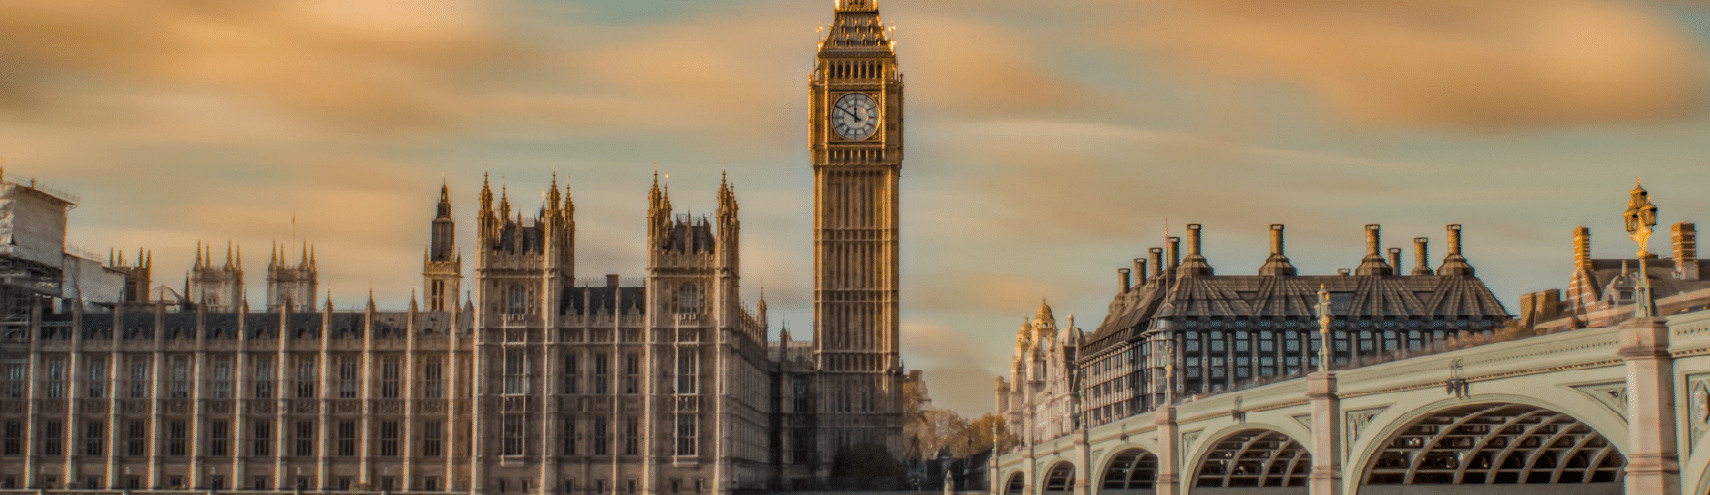 A landscape shot of the Big Ben at the north end of the Palace of Westminster in London, England